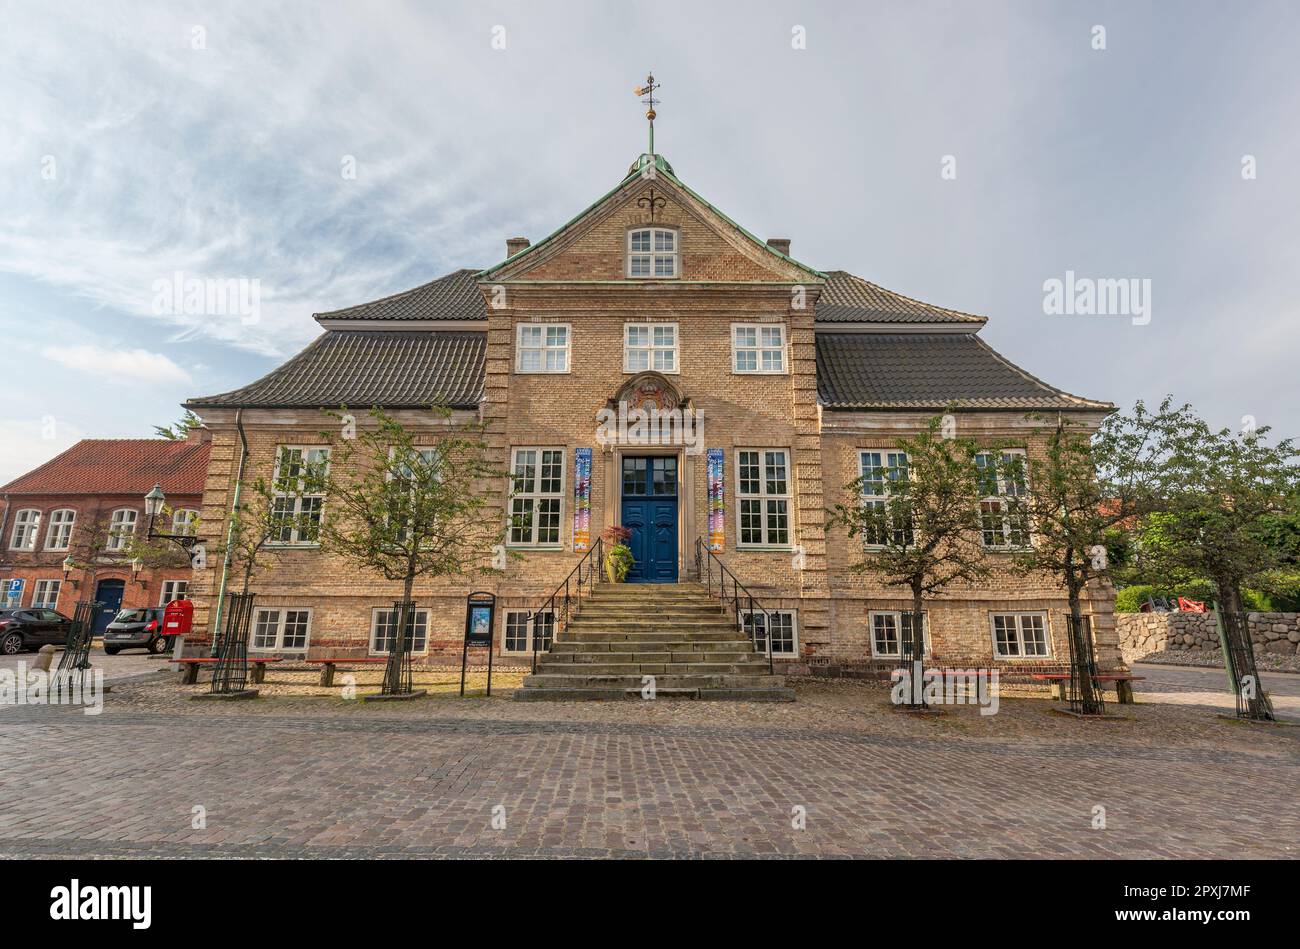 The Skovgaard Museum an art museum in the former town hall from 1728 by Claus Stallknecht in baroque style. Viborg, Denmark. Stock Photo